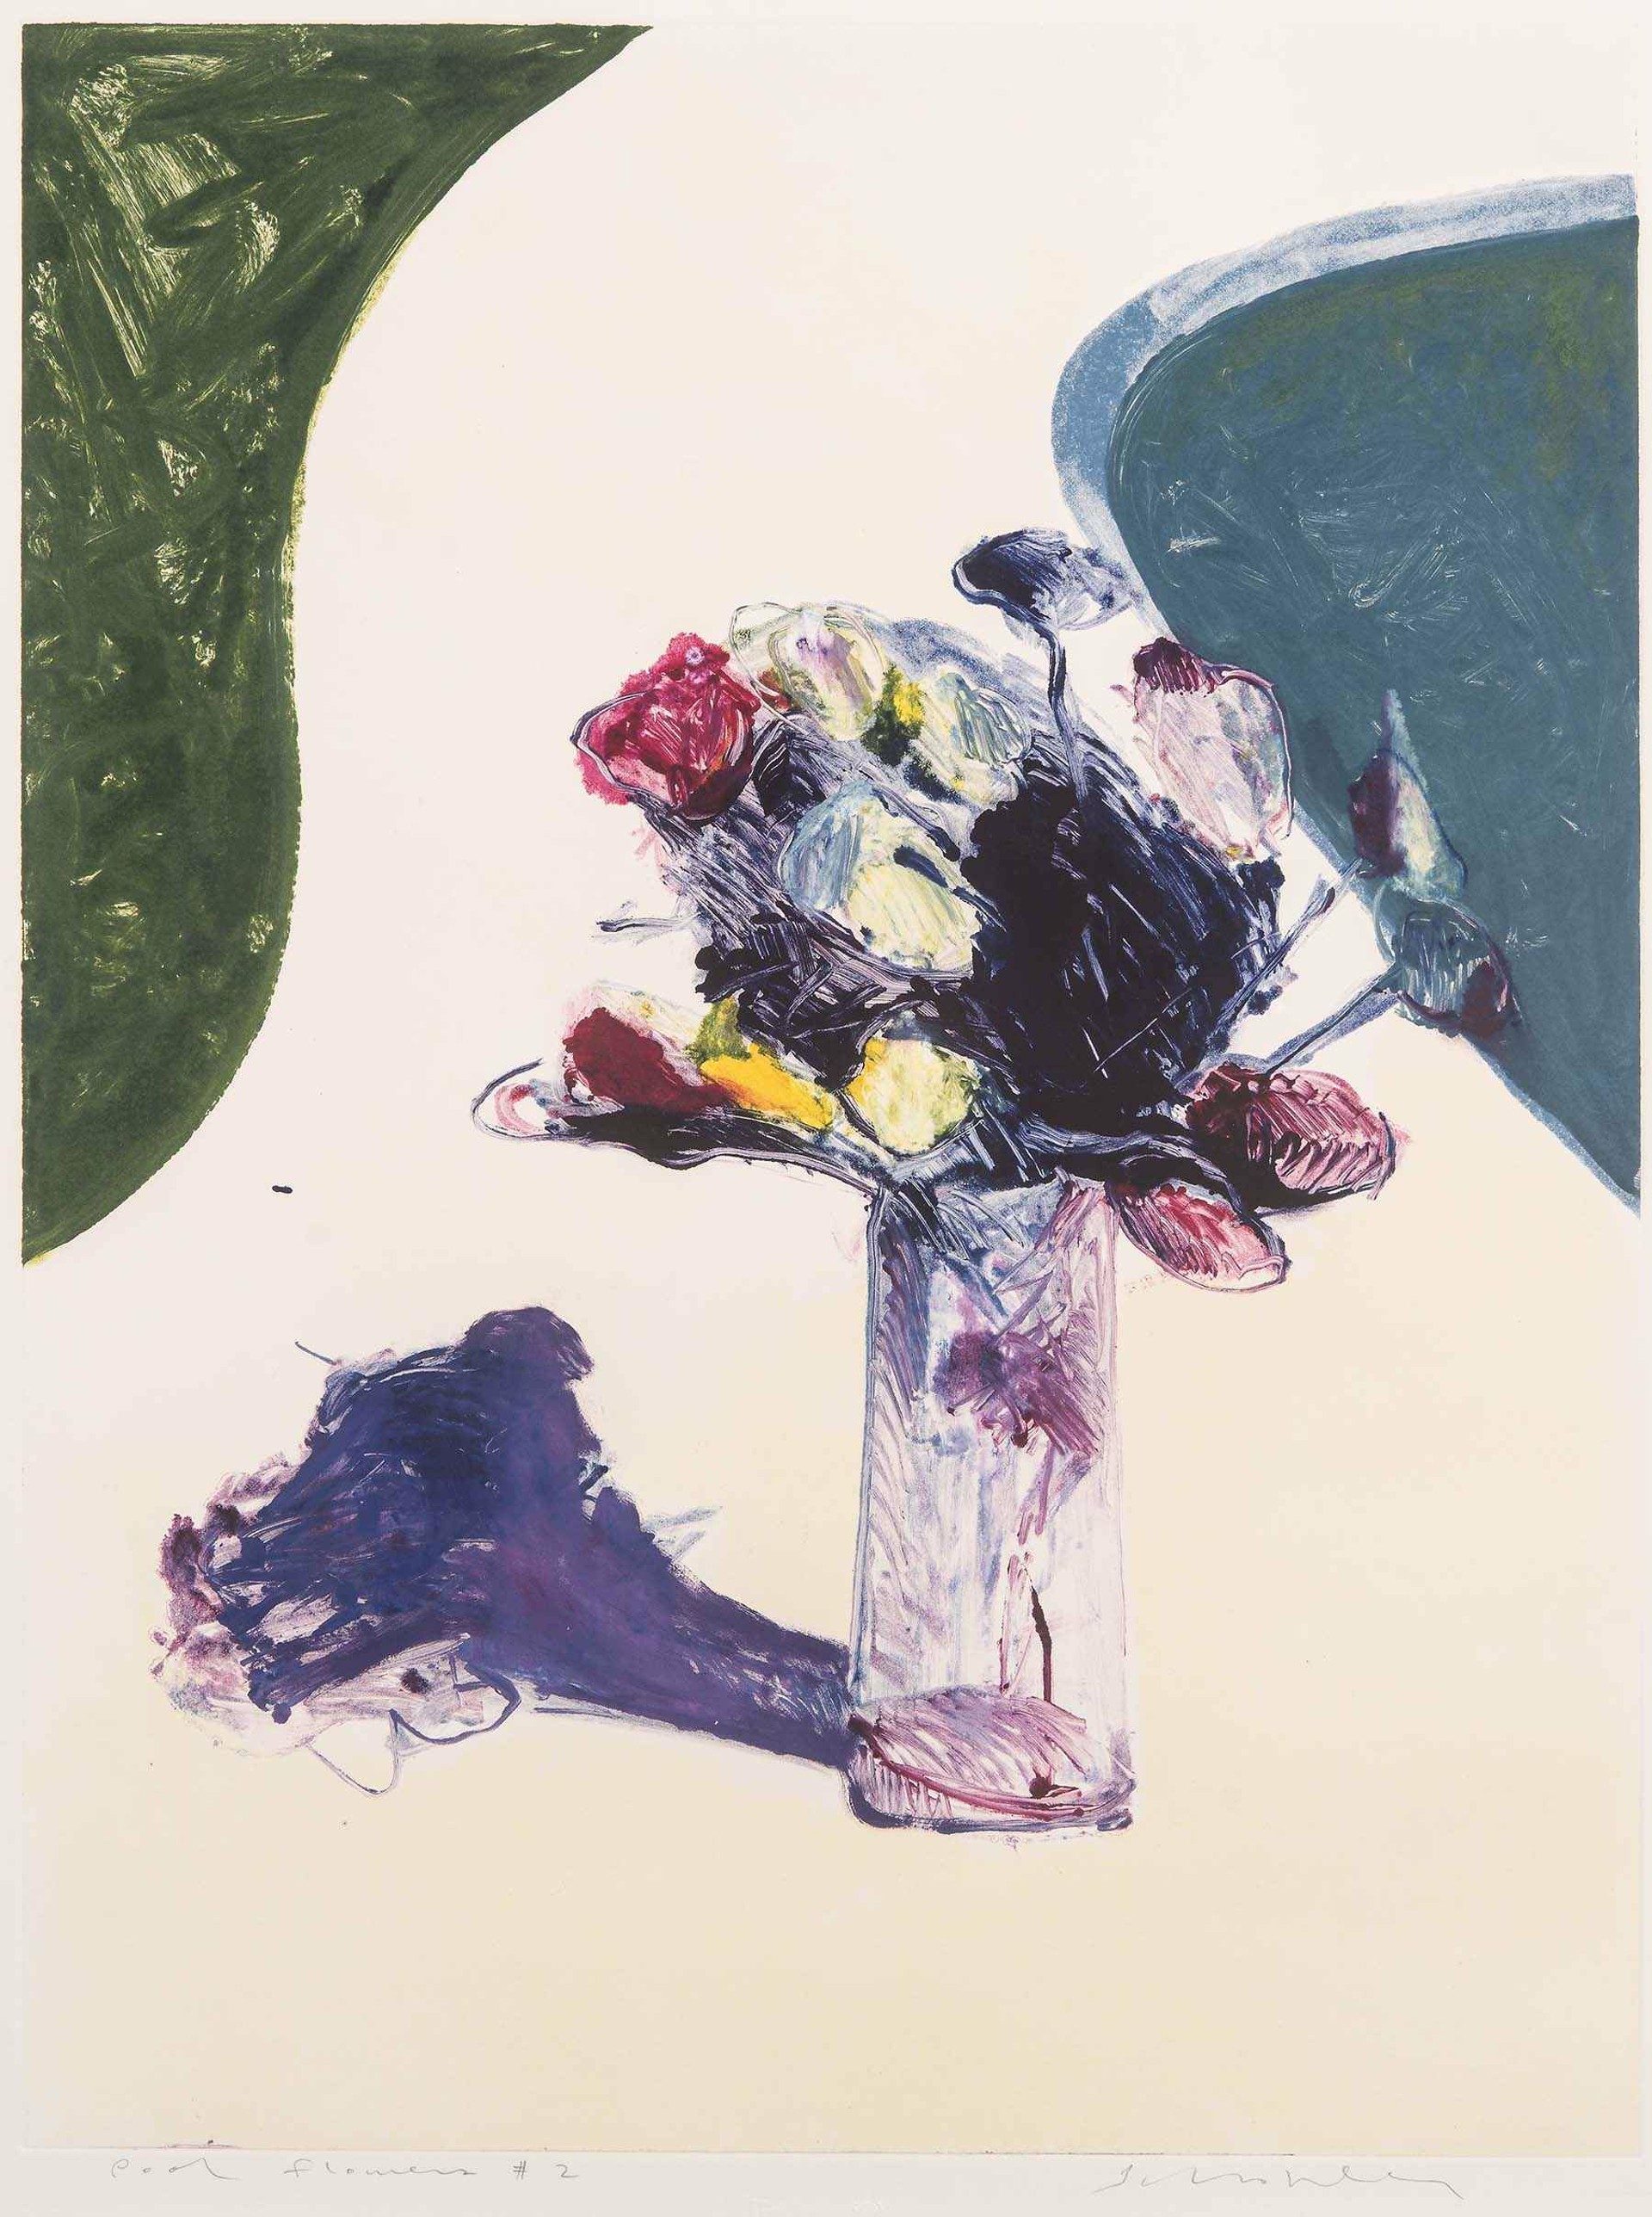 Pool Flowers #2 by Fritz Scholder